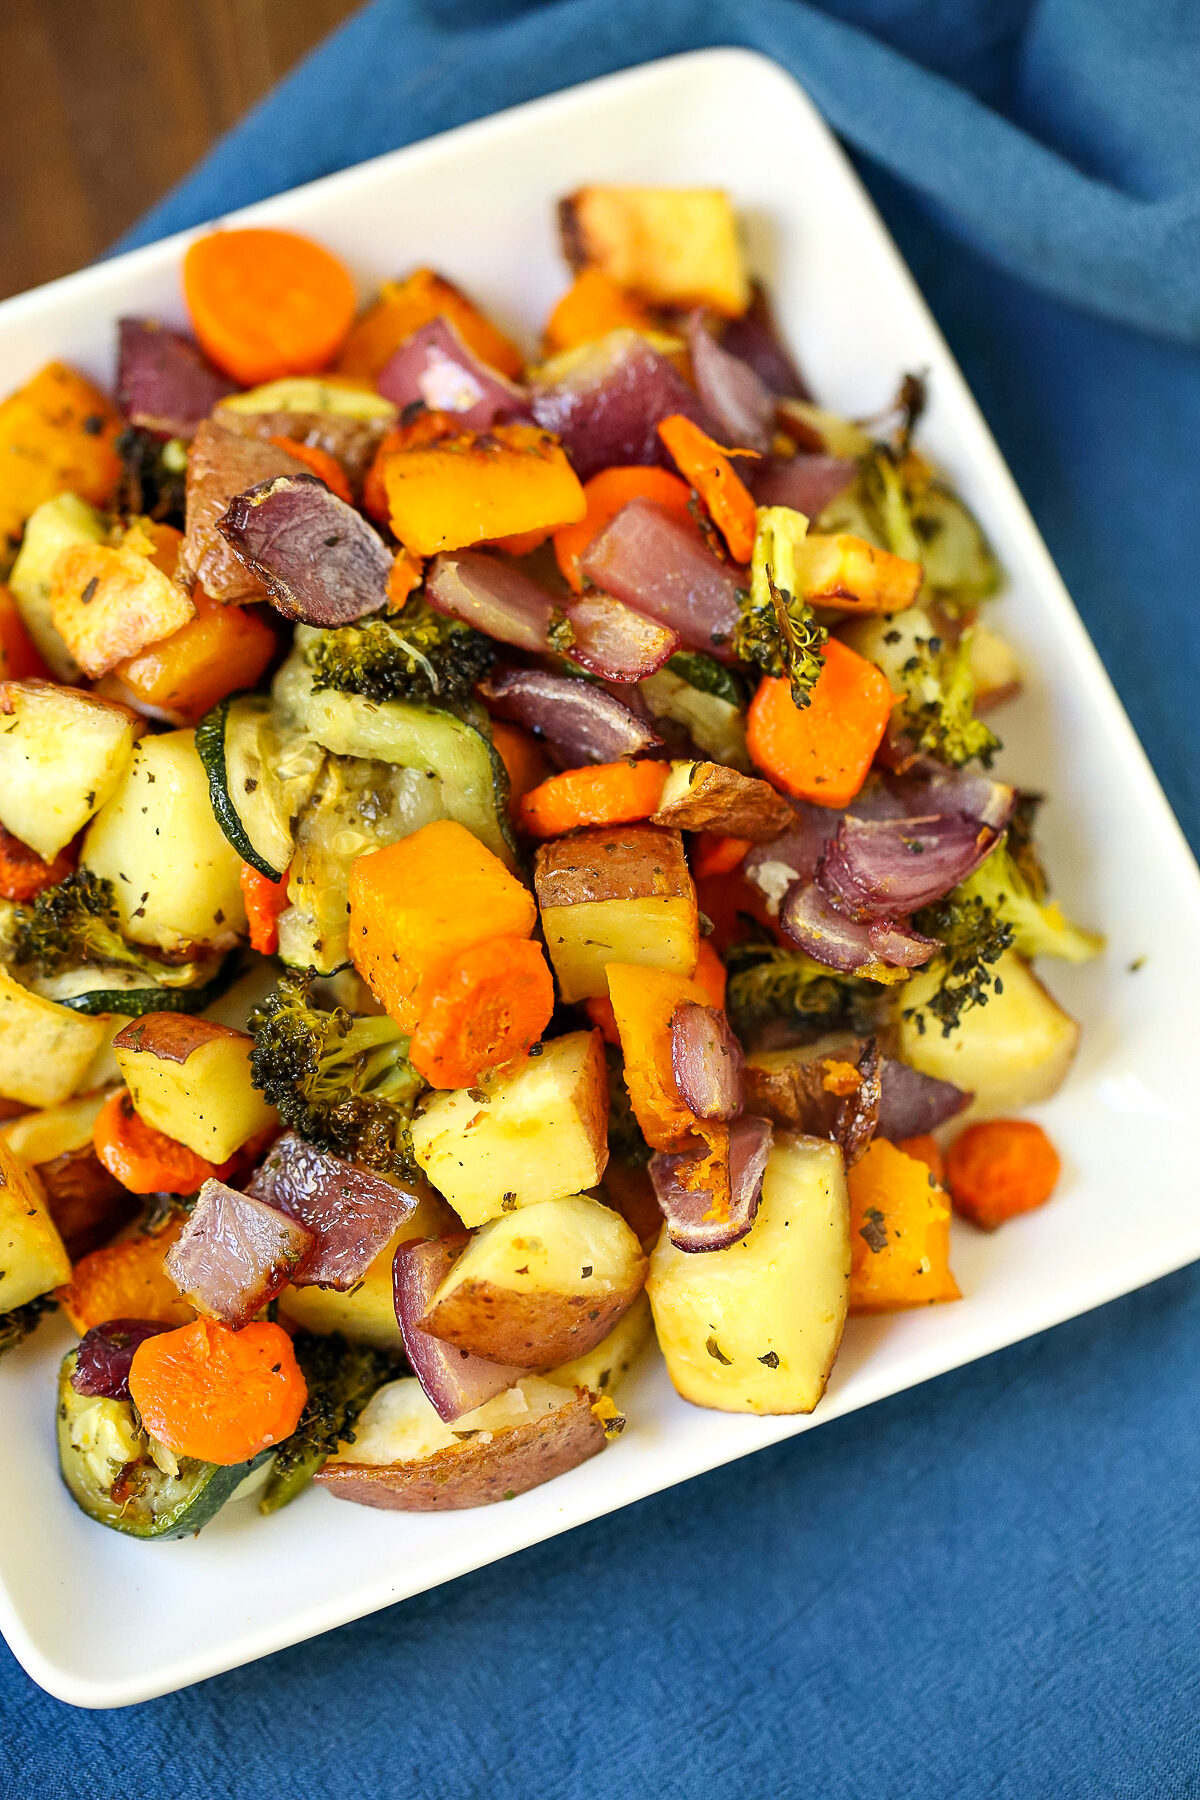 Oven-roasted vegetables are a great side dish to any meal, and this recipe is an easy and delicious way to prepare them.